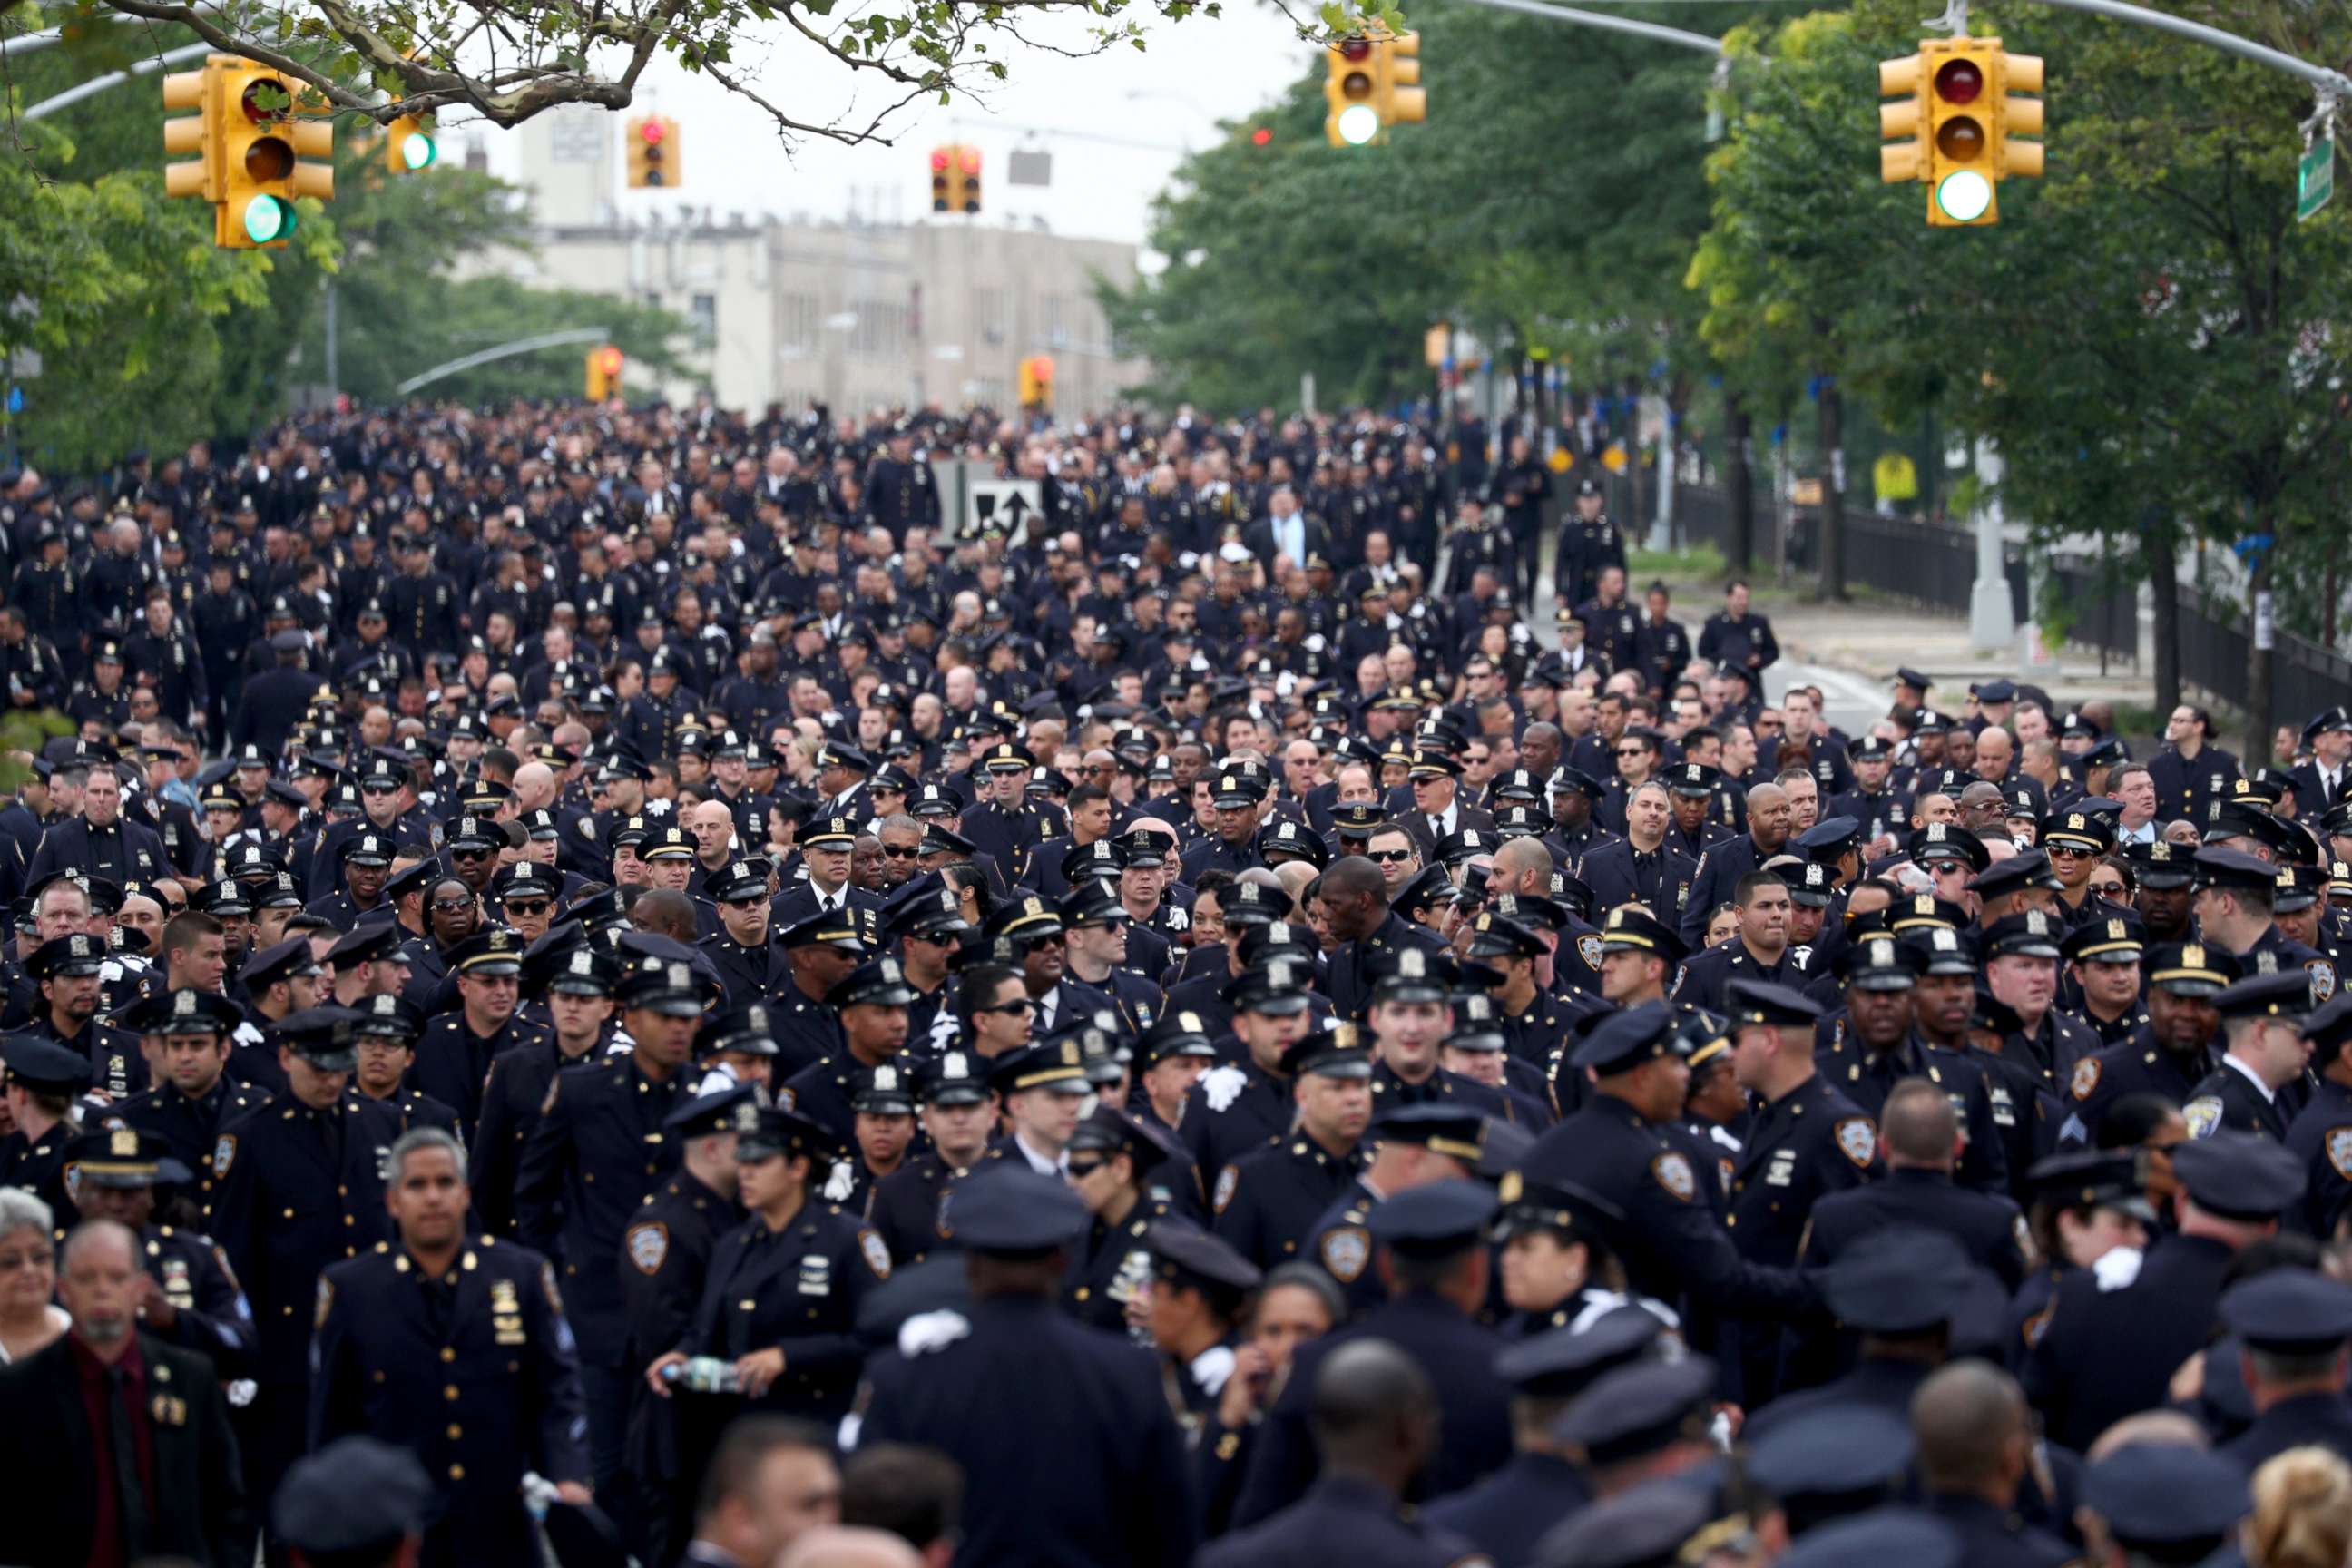 PHOTO: Police officers line up outside the funeral of slain New York Police Department (NYPD) Officer, Miosotis Familia, outside of the World Changers Church in the Bronx, New York, July 11, 2017.